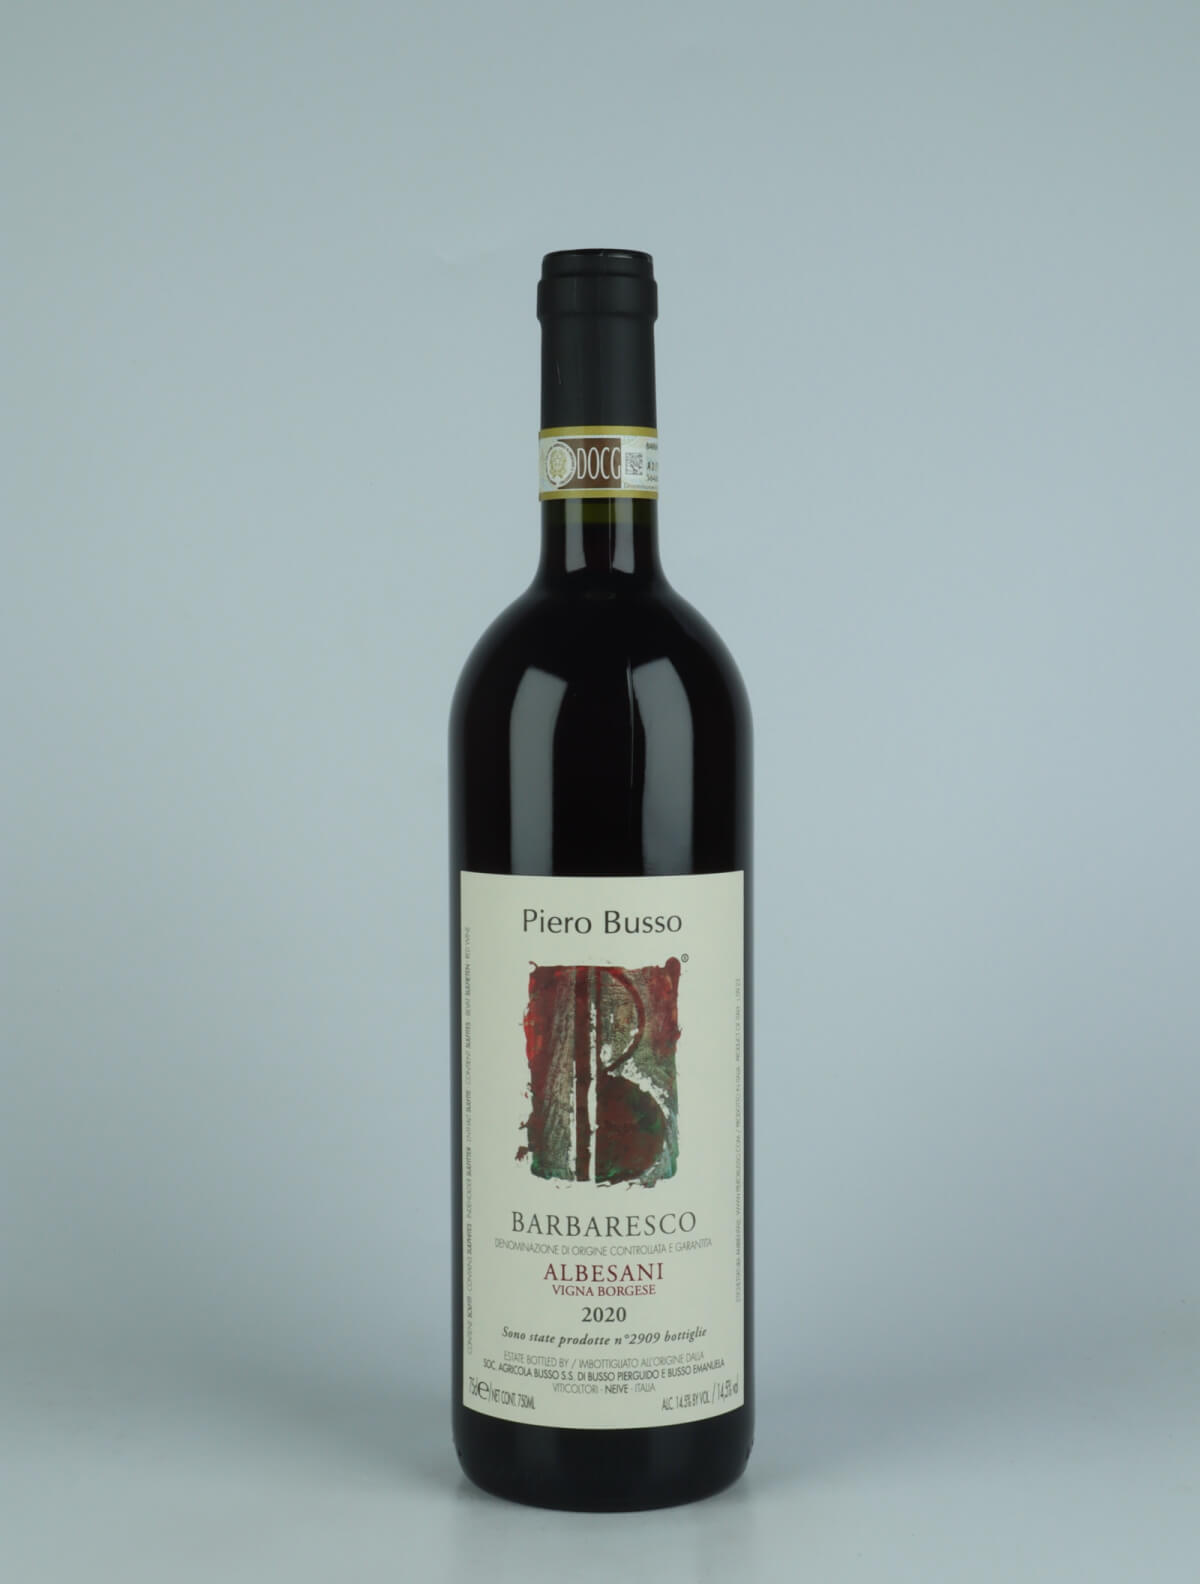 A bottle 2020 Barbaresco Albesani Vigna Borgese Red wine from Piero Busso, Piedmont in Italy